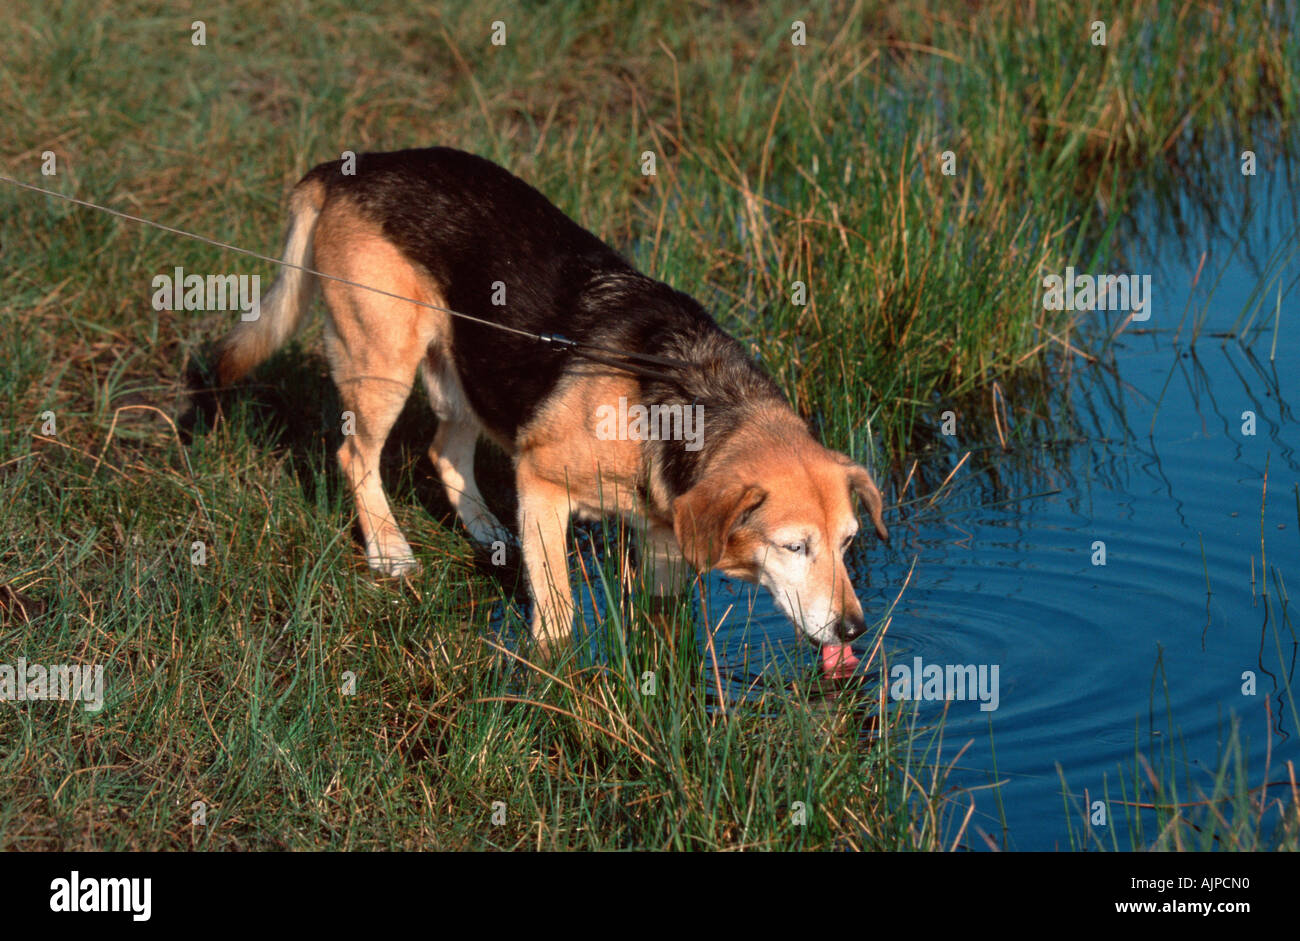 Mixed Breed Dog drinking from pond Stock Photo